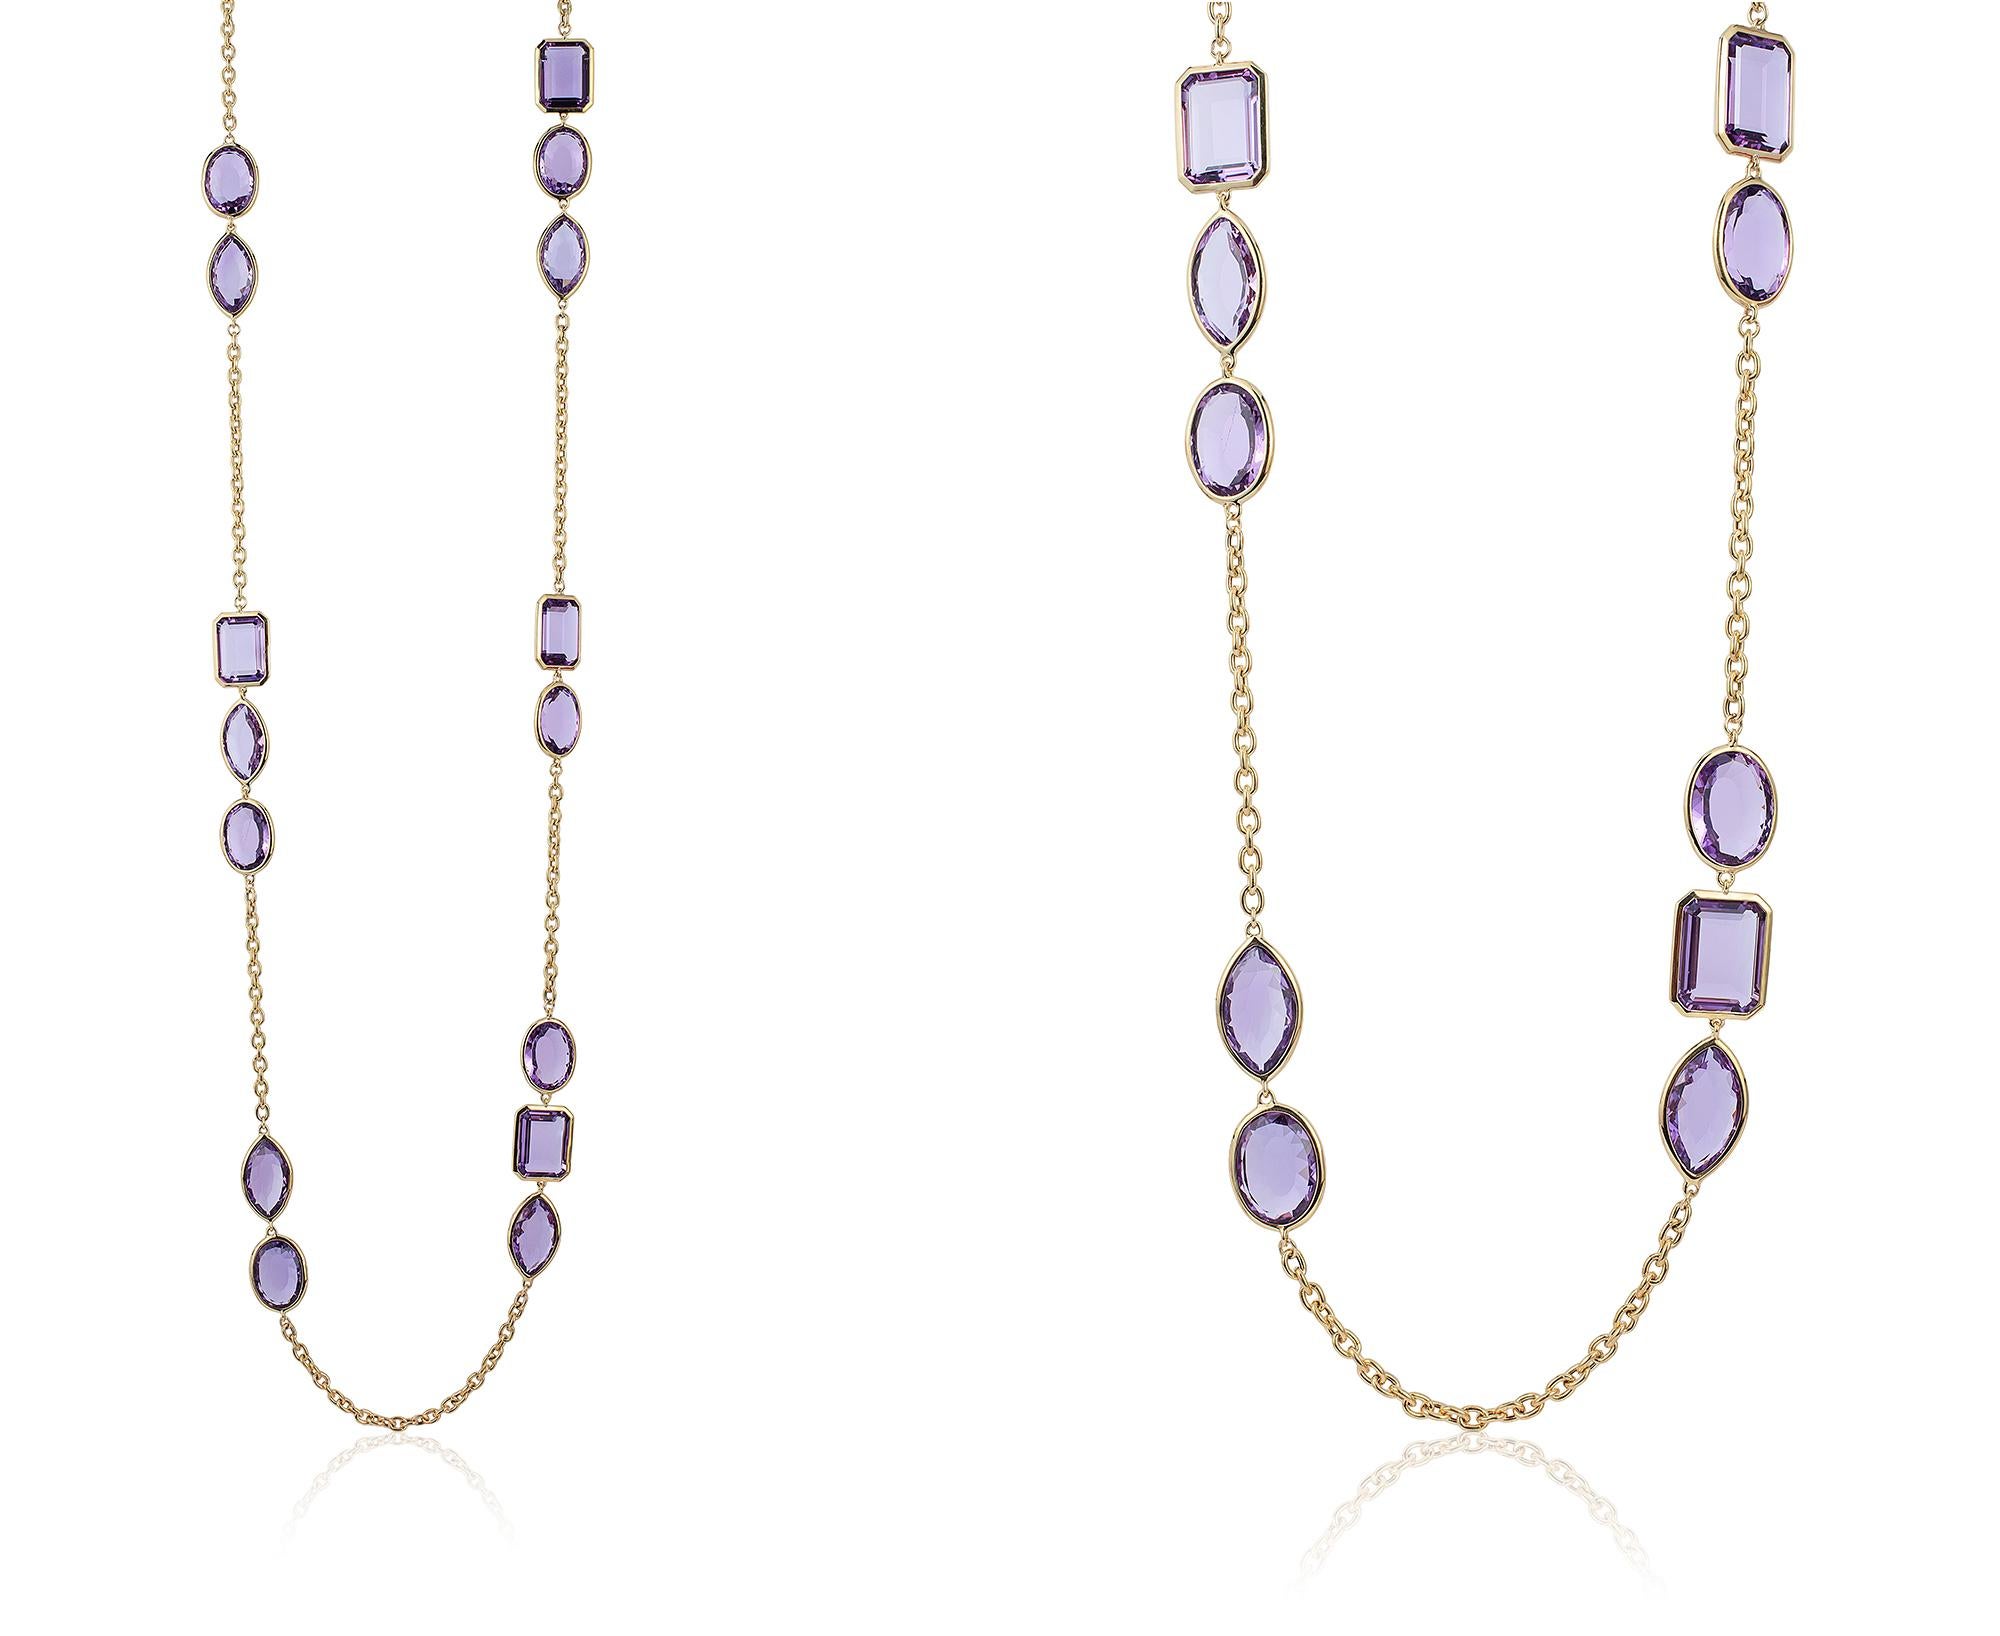 This Amethyst Multi-Shape Station Necklace from the 'Gossip' Collection is a stunning piece of jewelry crafted from 18K yellow gold. The necklace features multiple amethyst gemstones of various shapes and sizes that are set in station-style along